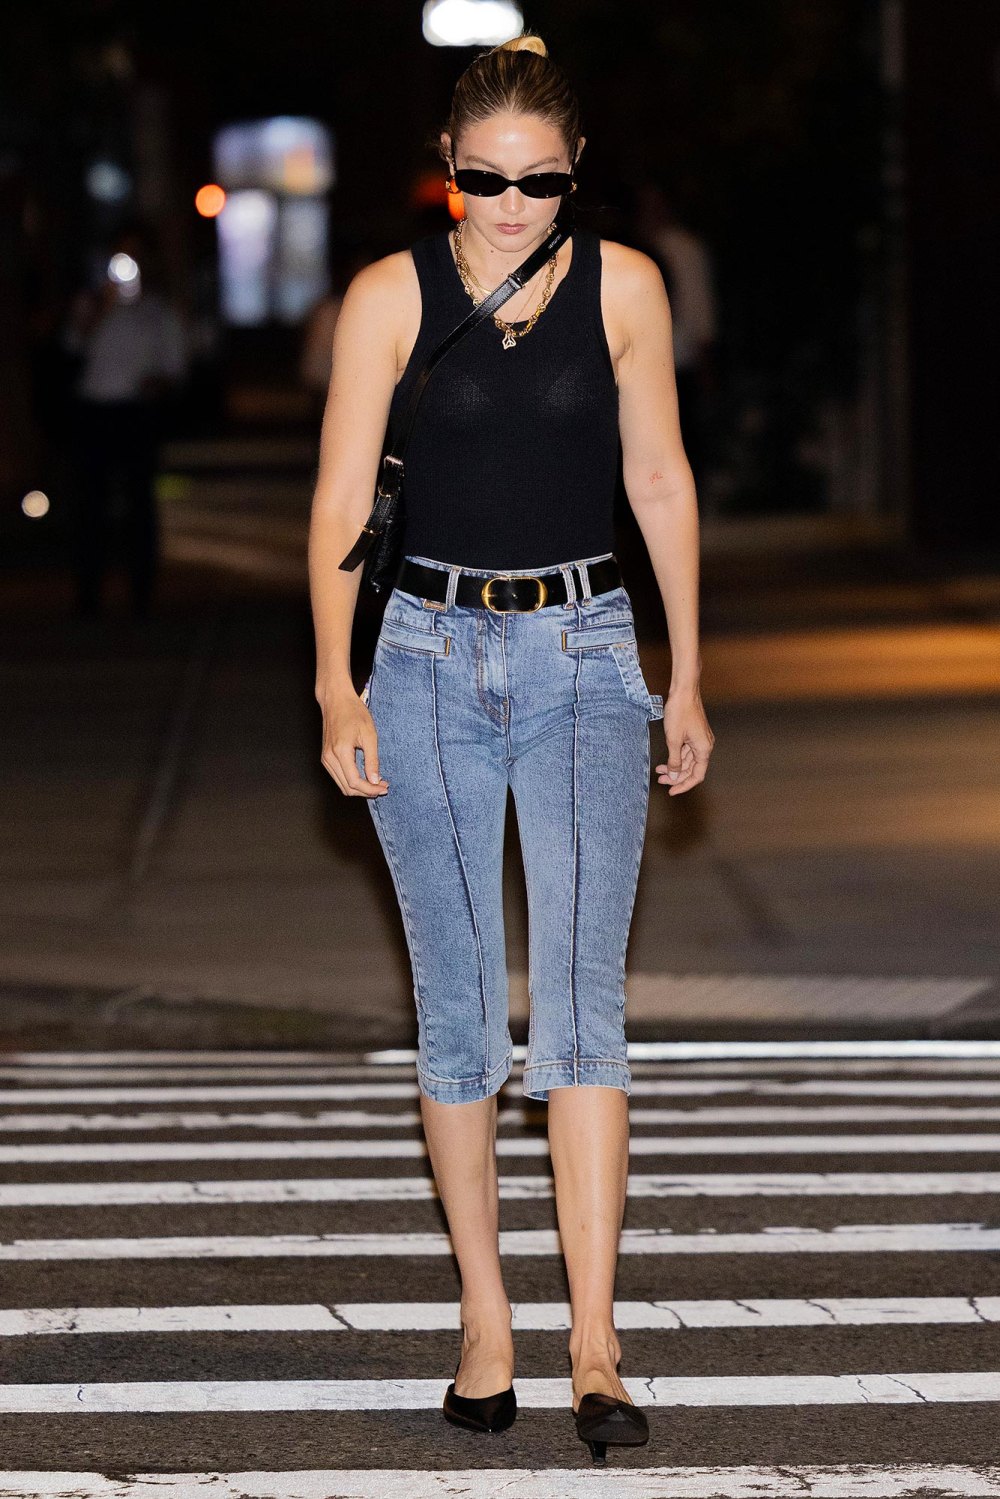 Gigi Hadid Revives the Capri Trend While Out in NYC: Photos